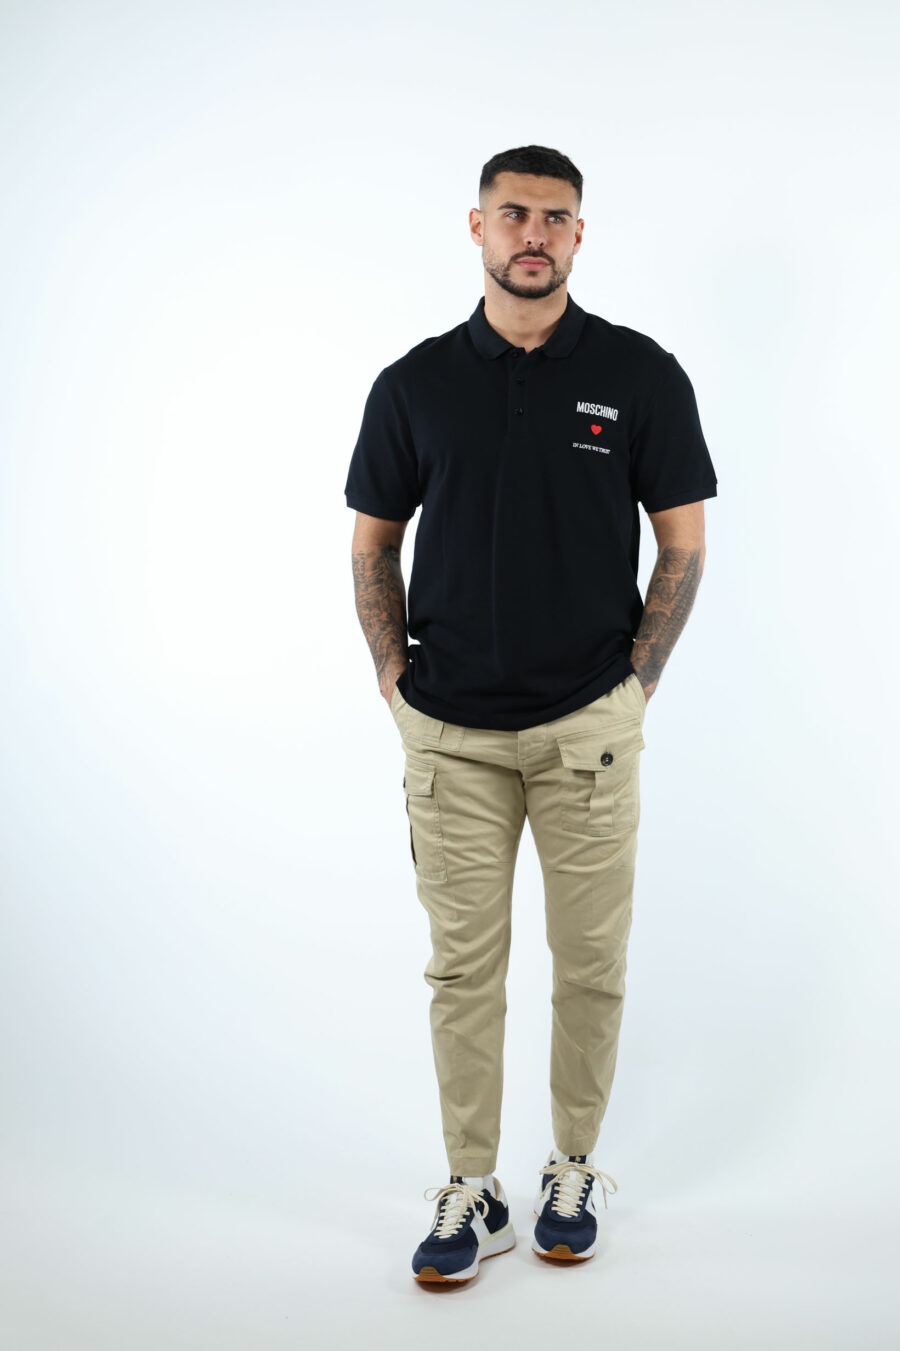 Black polo shirt with logo "in love we trust" - 106969